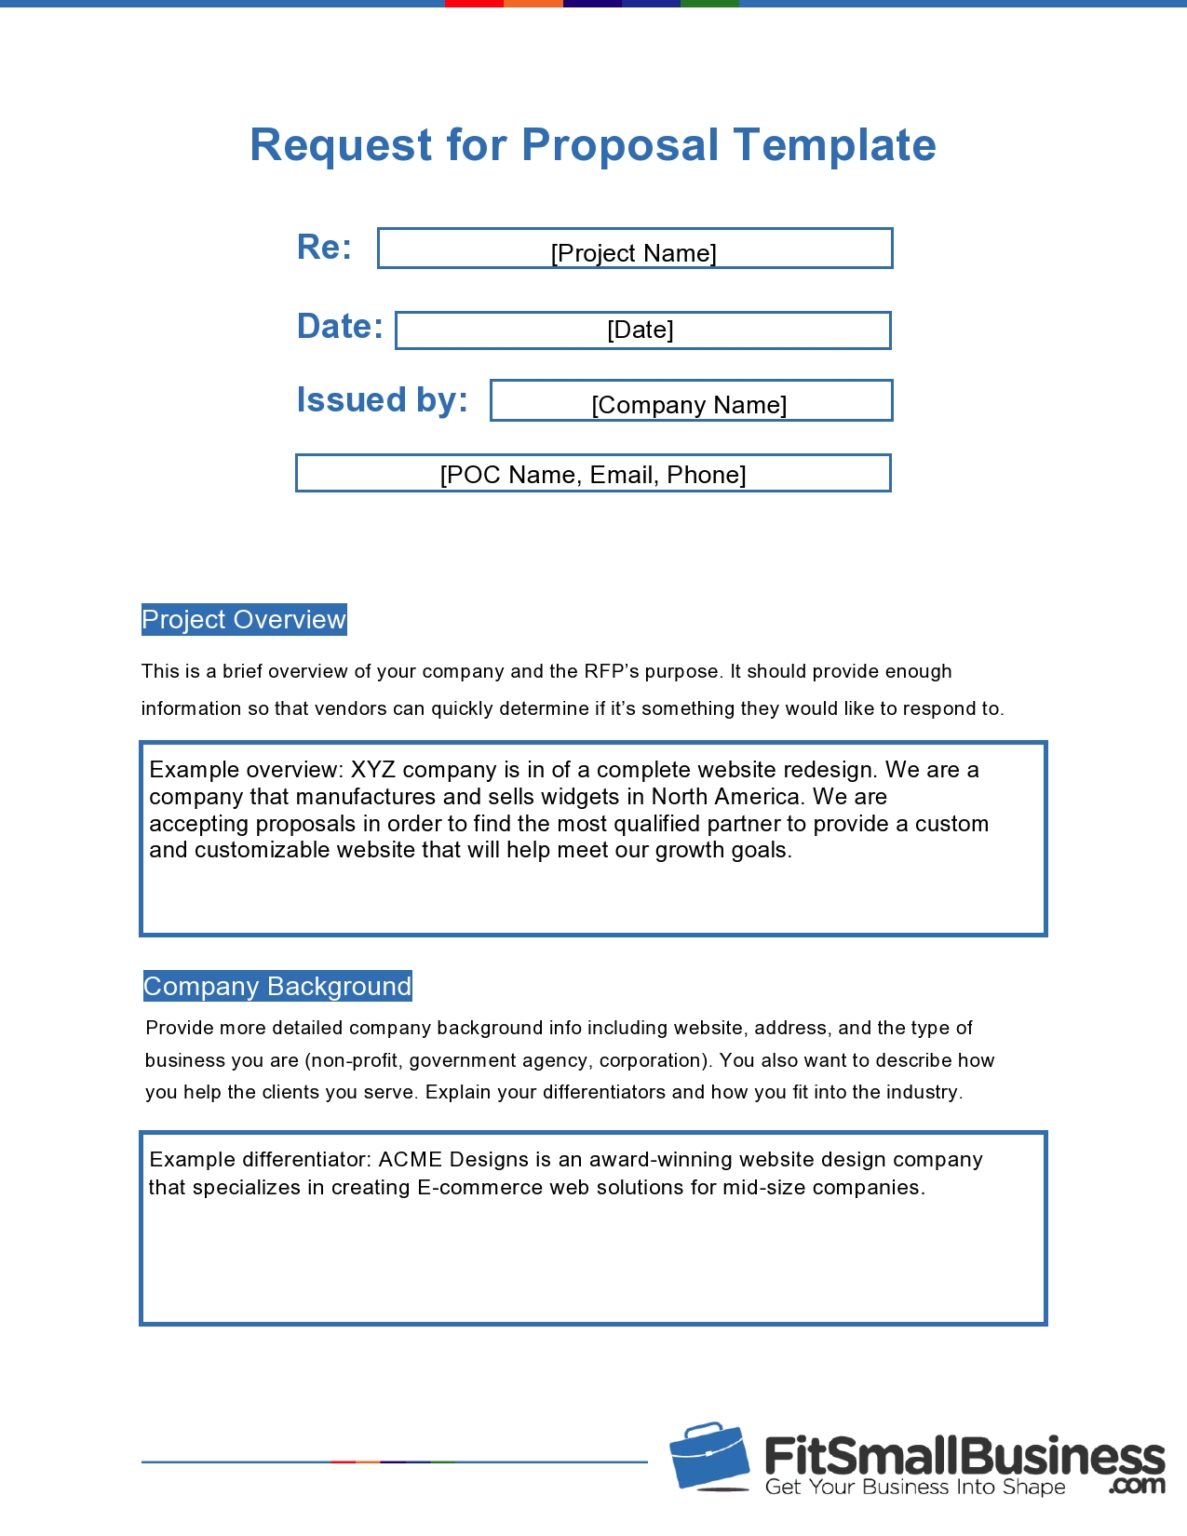 rfp response cover letter template word